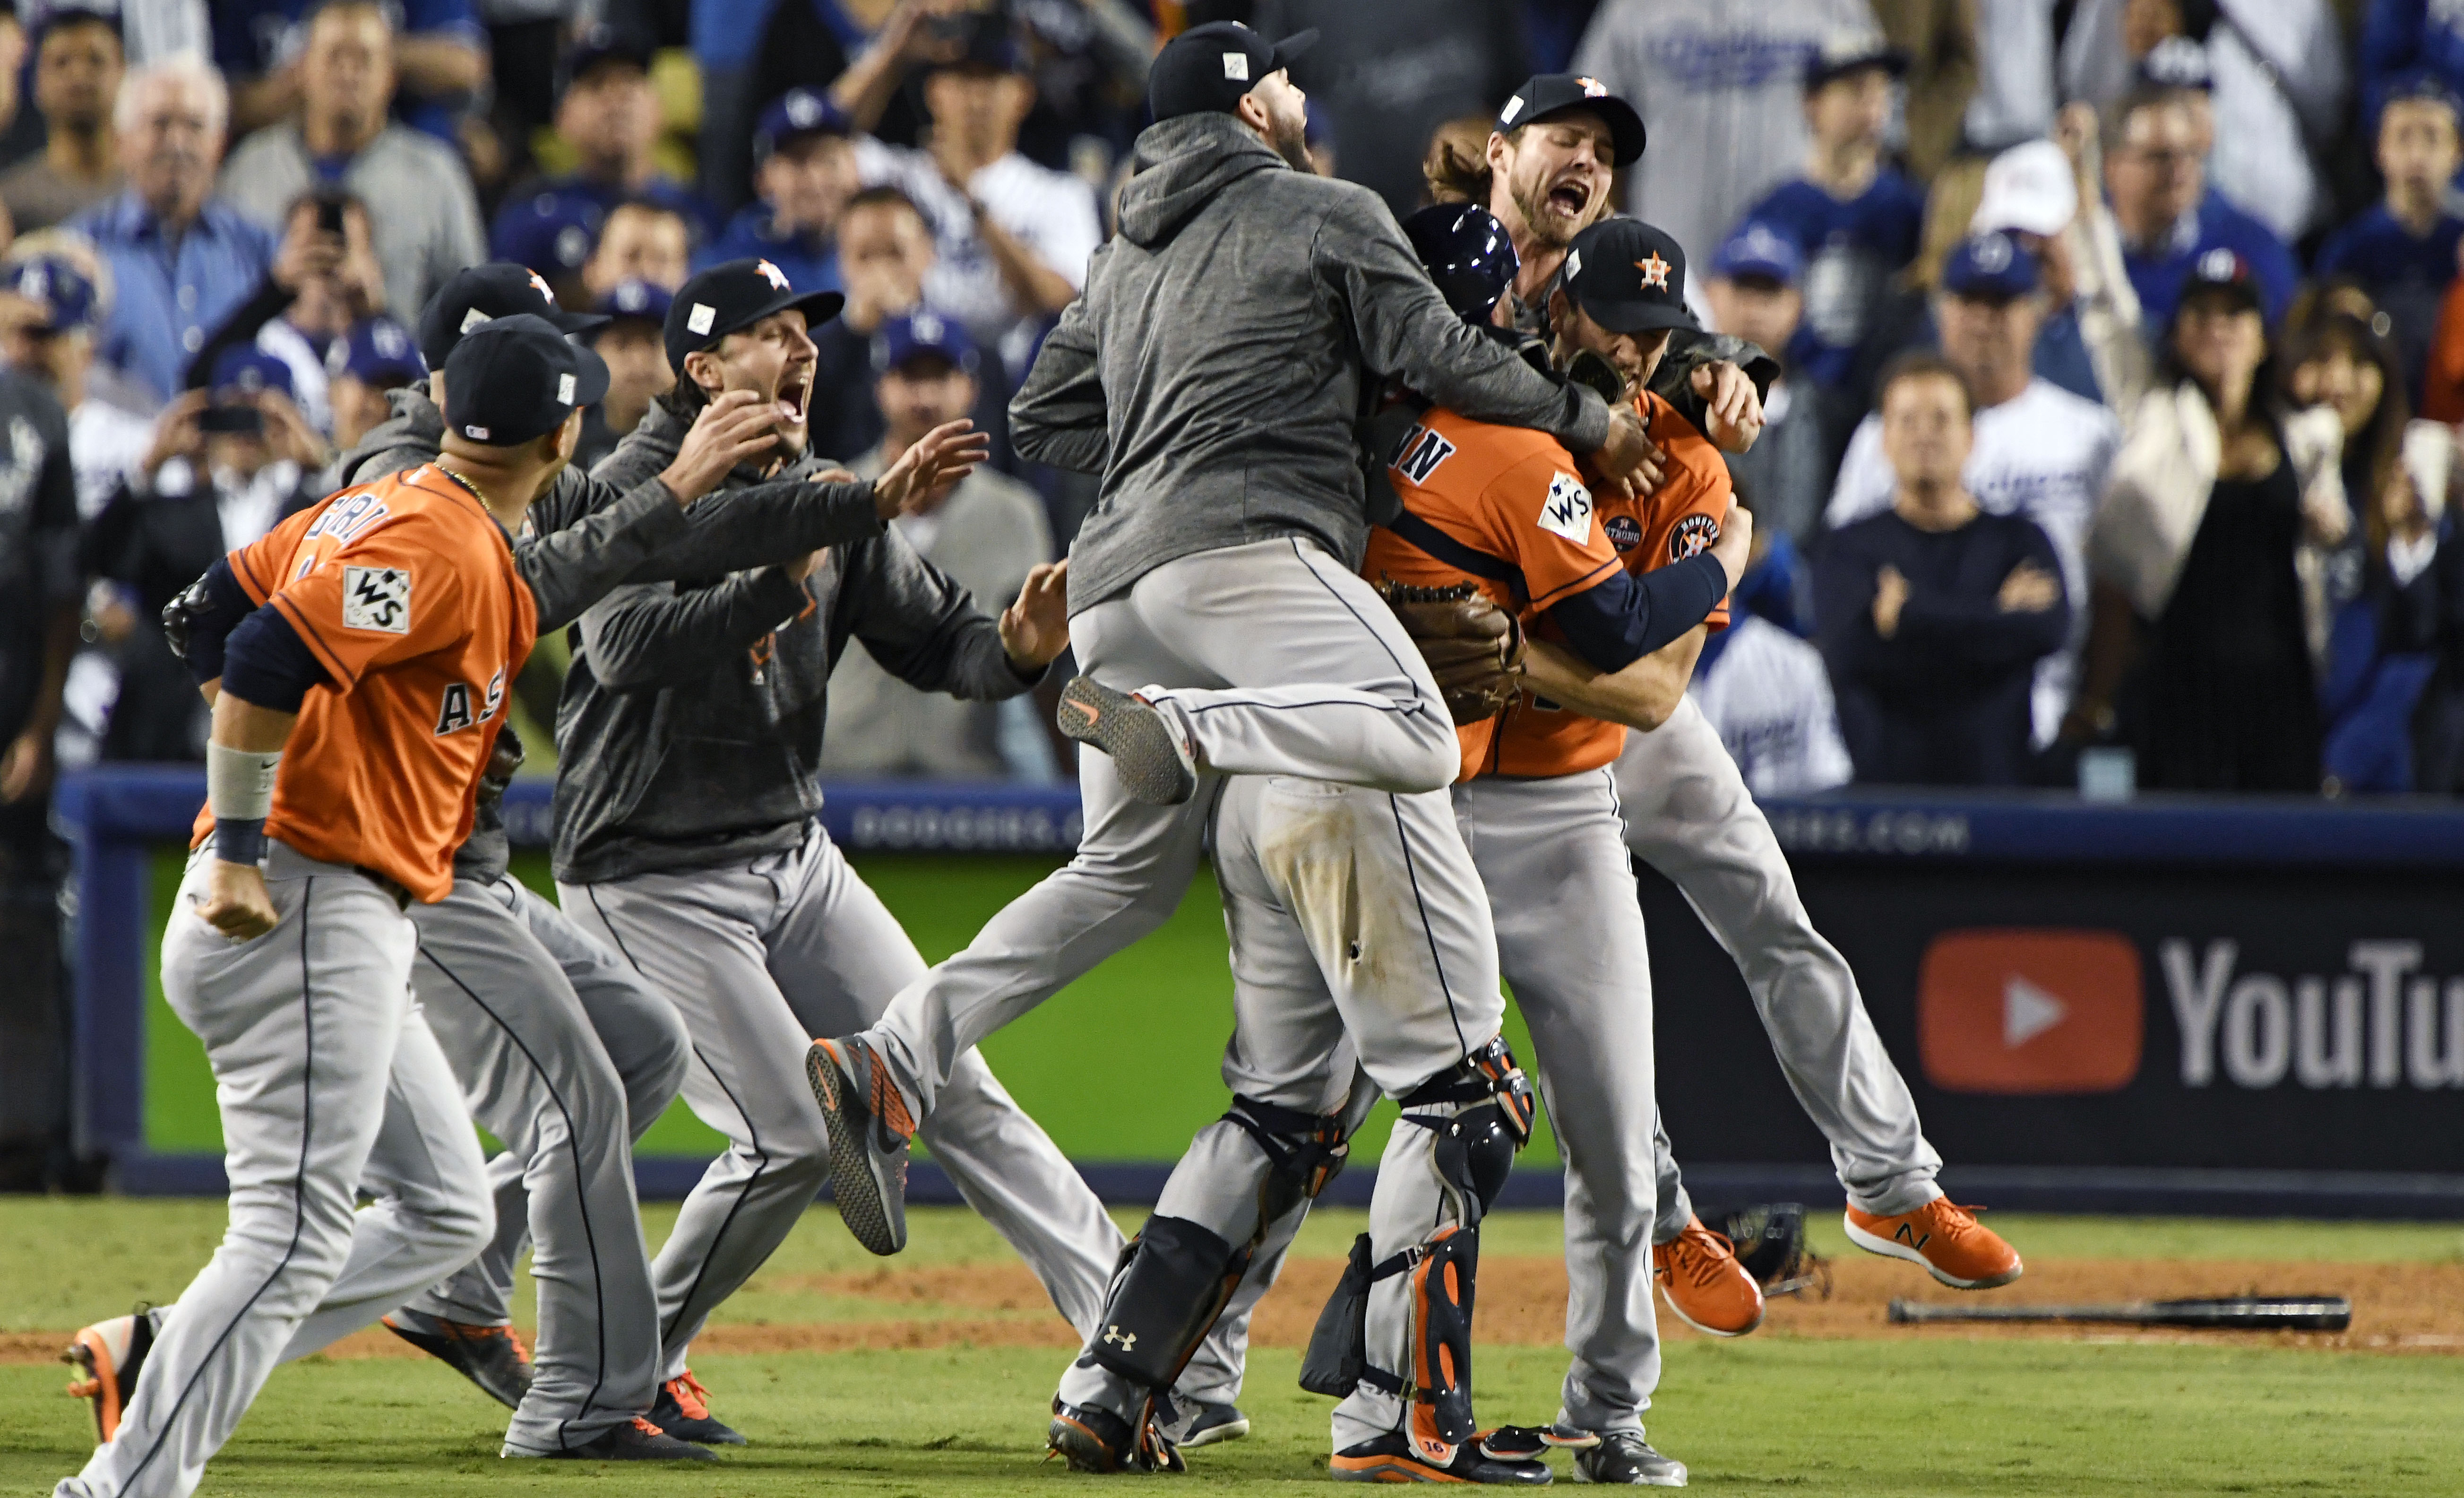 2017 World Series Champions: Houston Astros - Where to Watch and